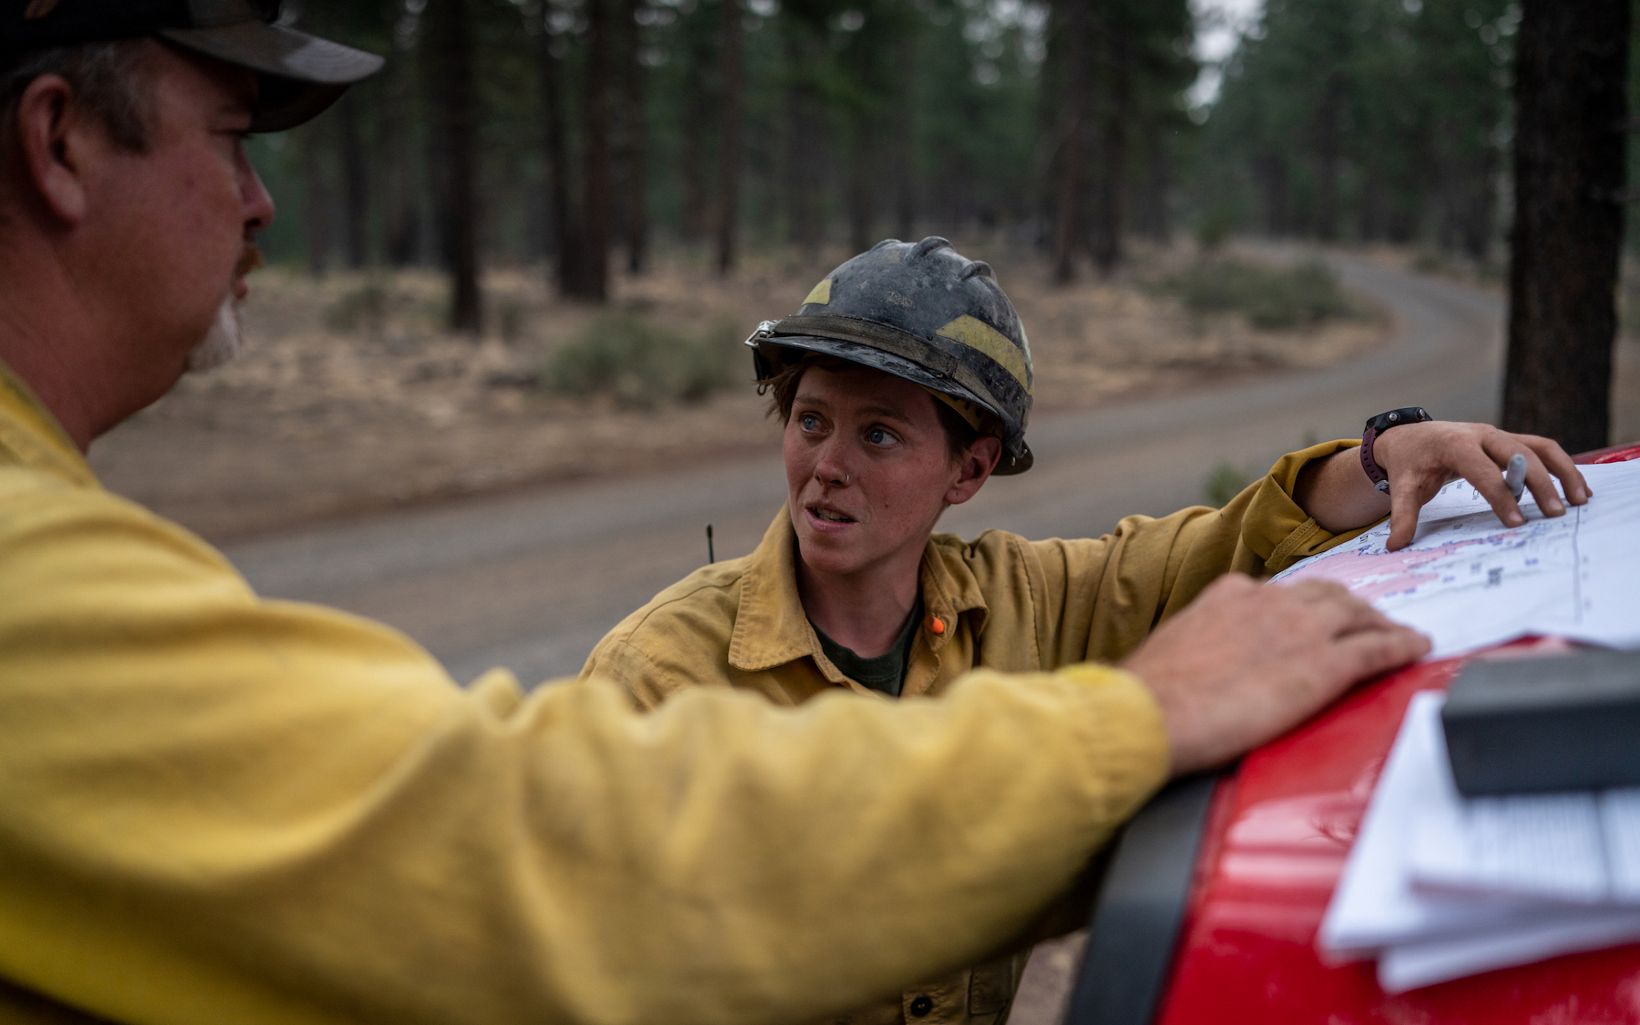 TNC Oregon Fire Manager Katie Sauerbrey looks at maps on the hood of a red truck and discusses fire management strategies with another TNC Fire Crew member. 